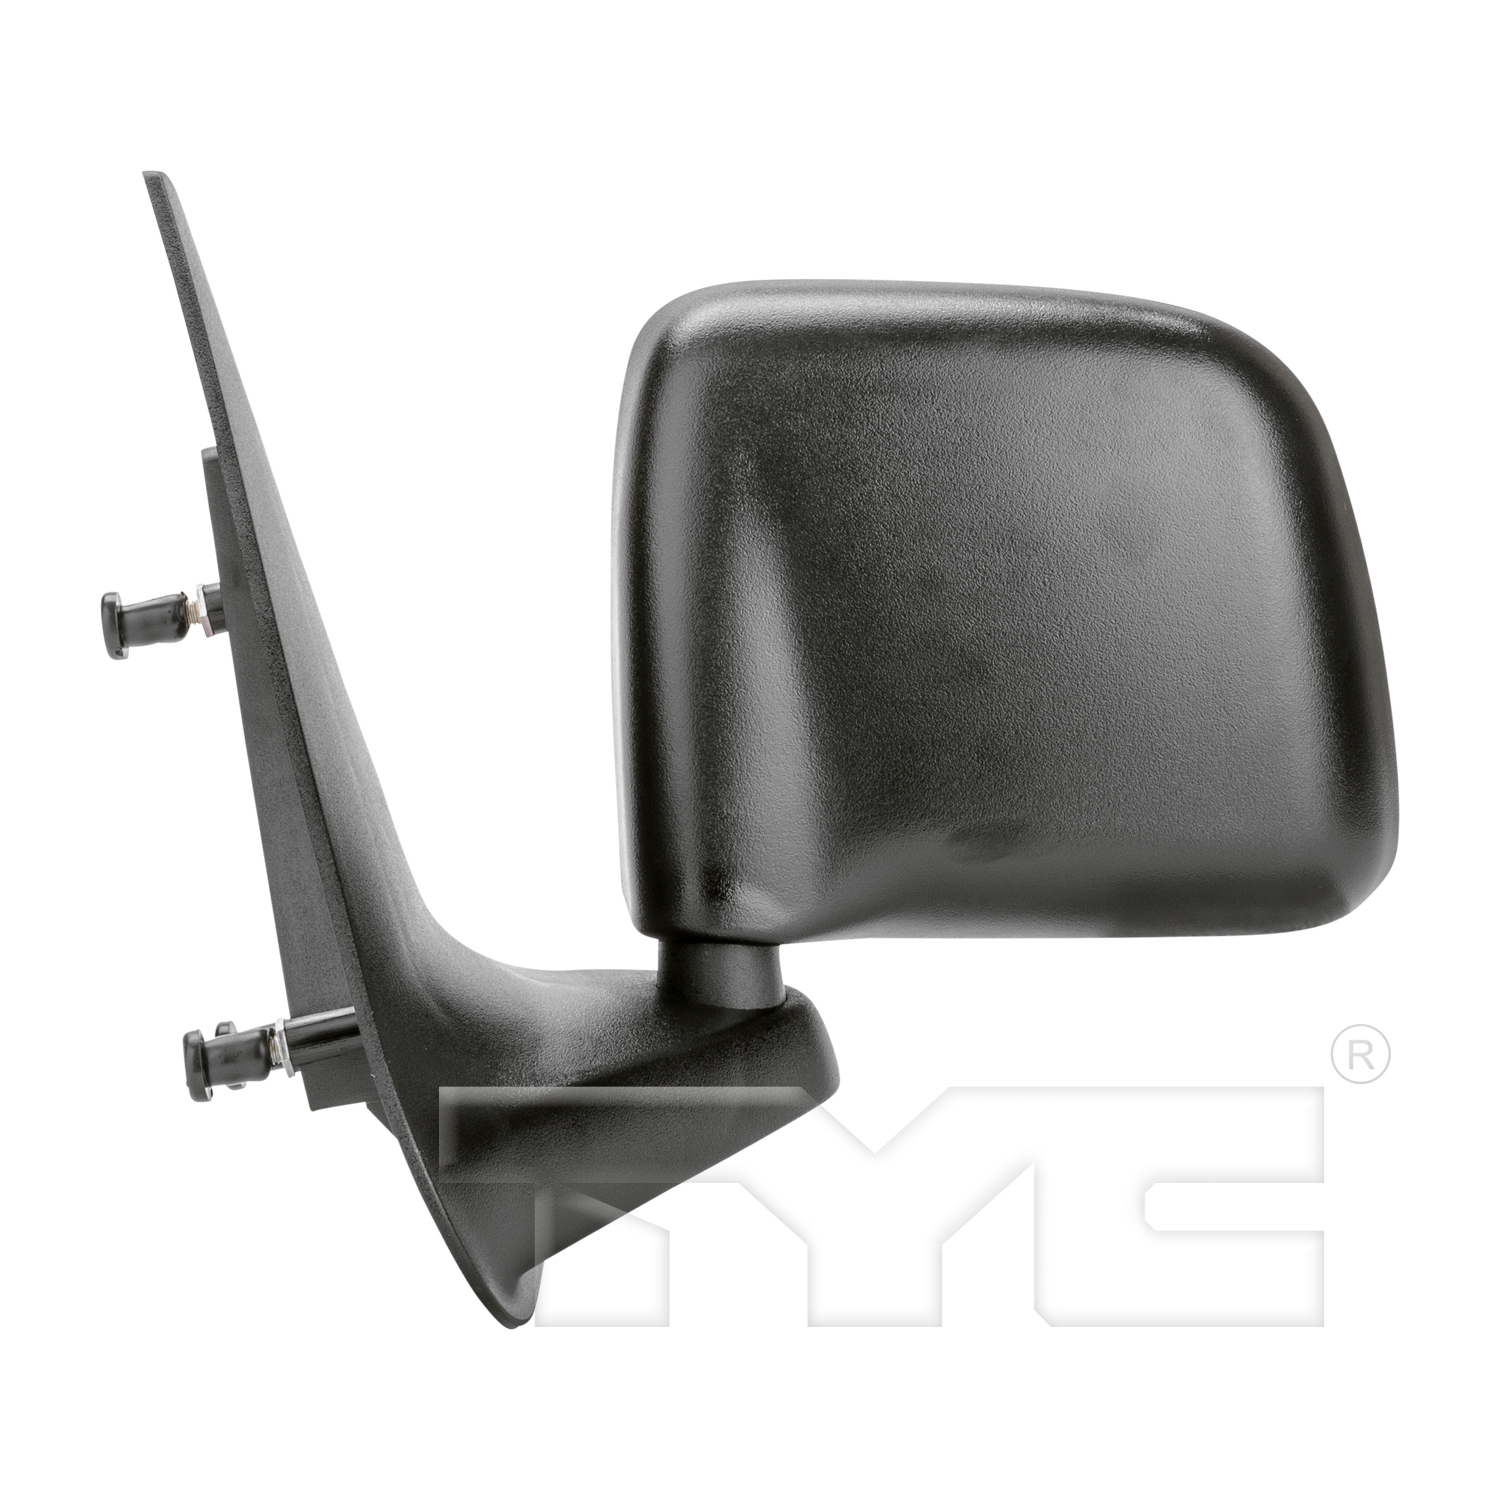 Aftermarket MIRRORS for MAZDA - B2500, B2500,98-98,LT Mirror outside rear view